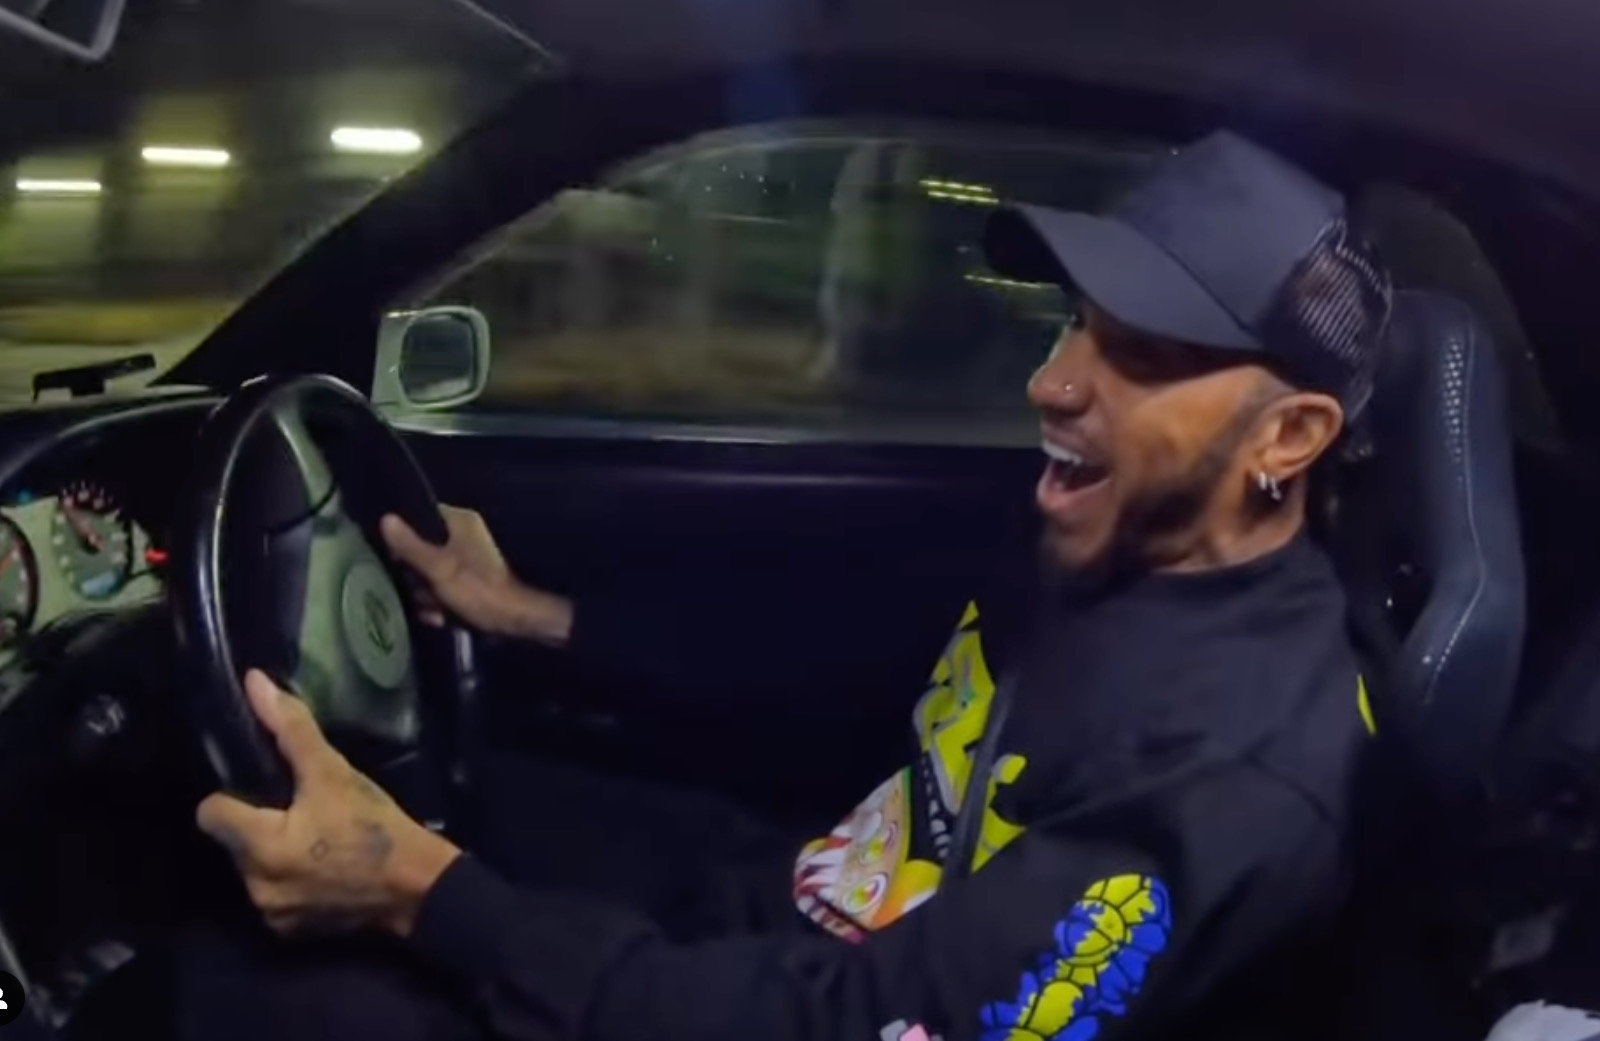 Lewis Hamilton posts cool video on Instagram, trashing a rented Nissan GT-R R34